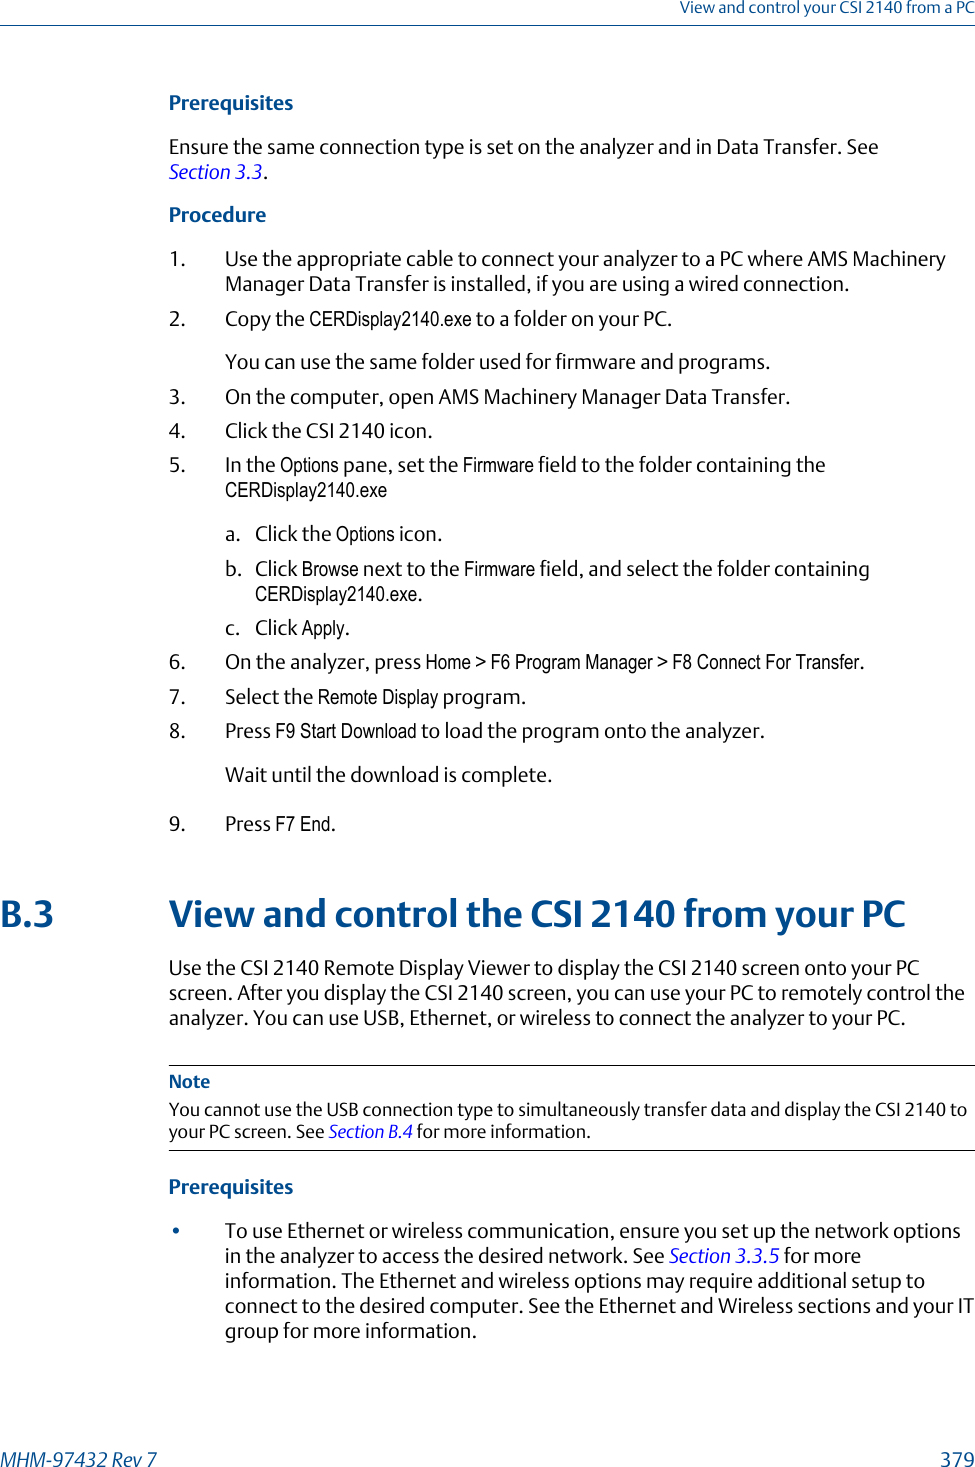 PrerequisitesEnsure the same connection type is set on the analyzer and in Data Transfer. See Section 3.3.Procedure1. Use the appropriate cable to connect your analyzer to a PC where AMS MachineryManager Data Transfer is installed, if you are using a wired connection.2. Copy the CERDisplay2140.exe to a folder on your PC.You can use the same folder used for firmware and programs.3. On the computer, open AMS Machinery Manager Data Transfer.4. Click the CSI 2140 icon.5. In the Options pane, set the Firmware field to the folder containing theCERDisplay2140.exea. Click the Options icon.b. Click Browse next to the Firmware field, and select the folder containingCERDisplay2140.exe.c. Click Apply.6. On the analyzer, press Home &gt; F6 Program Manager &gt; F8 Connect For Transfer.7. Select the Remote Display program.8. Press F9 Start Download to load the program onto the analyzer.Wait until the download is complete.9. Press F7 End.B.3 View and control the CSI 2140 from your PCUse the CSI 2140 Remote Display Viewer to display the CSI 2140 screen onto your PCscreen. After you display the CSI 2140 screen, you can use your PC to remotely control theanalyzer. You can use USB, Ethernet, or wireless to connect the analyzer to your PC.NoteYou cannot use the USB connection type to simultaneously transfer data and display the CSI 2140 toyour PC screen. See Section B.4 for more information.Prerequisites•To use Ethernet or wireless communication, ensure you set up the network optionsin the analyzer to access the desired network. See Section 3.3.5 for moreinformation. The Ethernet and wireless options may require additional setup toconnect to the desired computer. See the Ethernet and Wireless sections and your ITgroup for more information.View and control your CSI 2140 from a PCMHM-97432 Rev 7  379